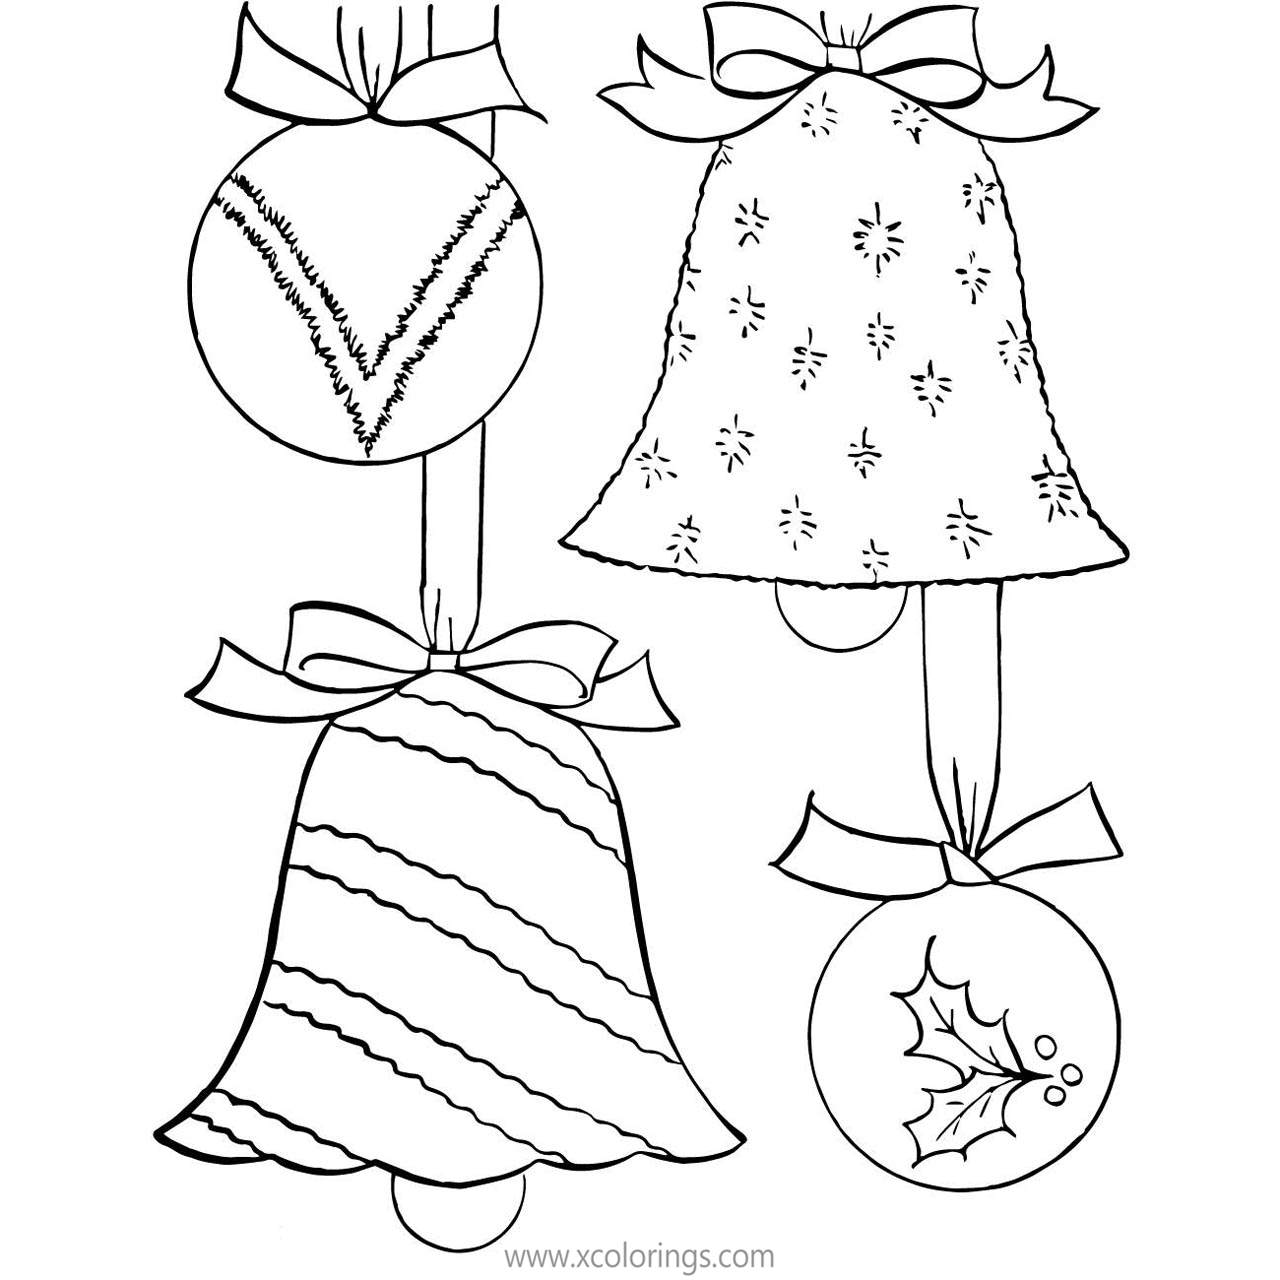 Free Christmas Ornament and Bells Coloring Pages printable